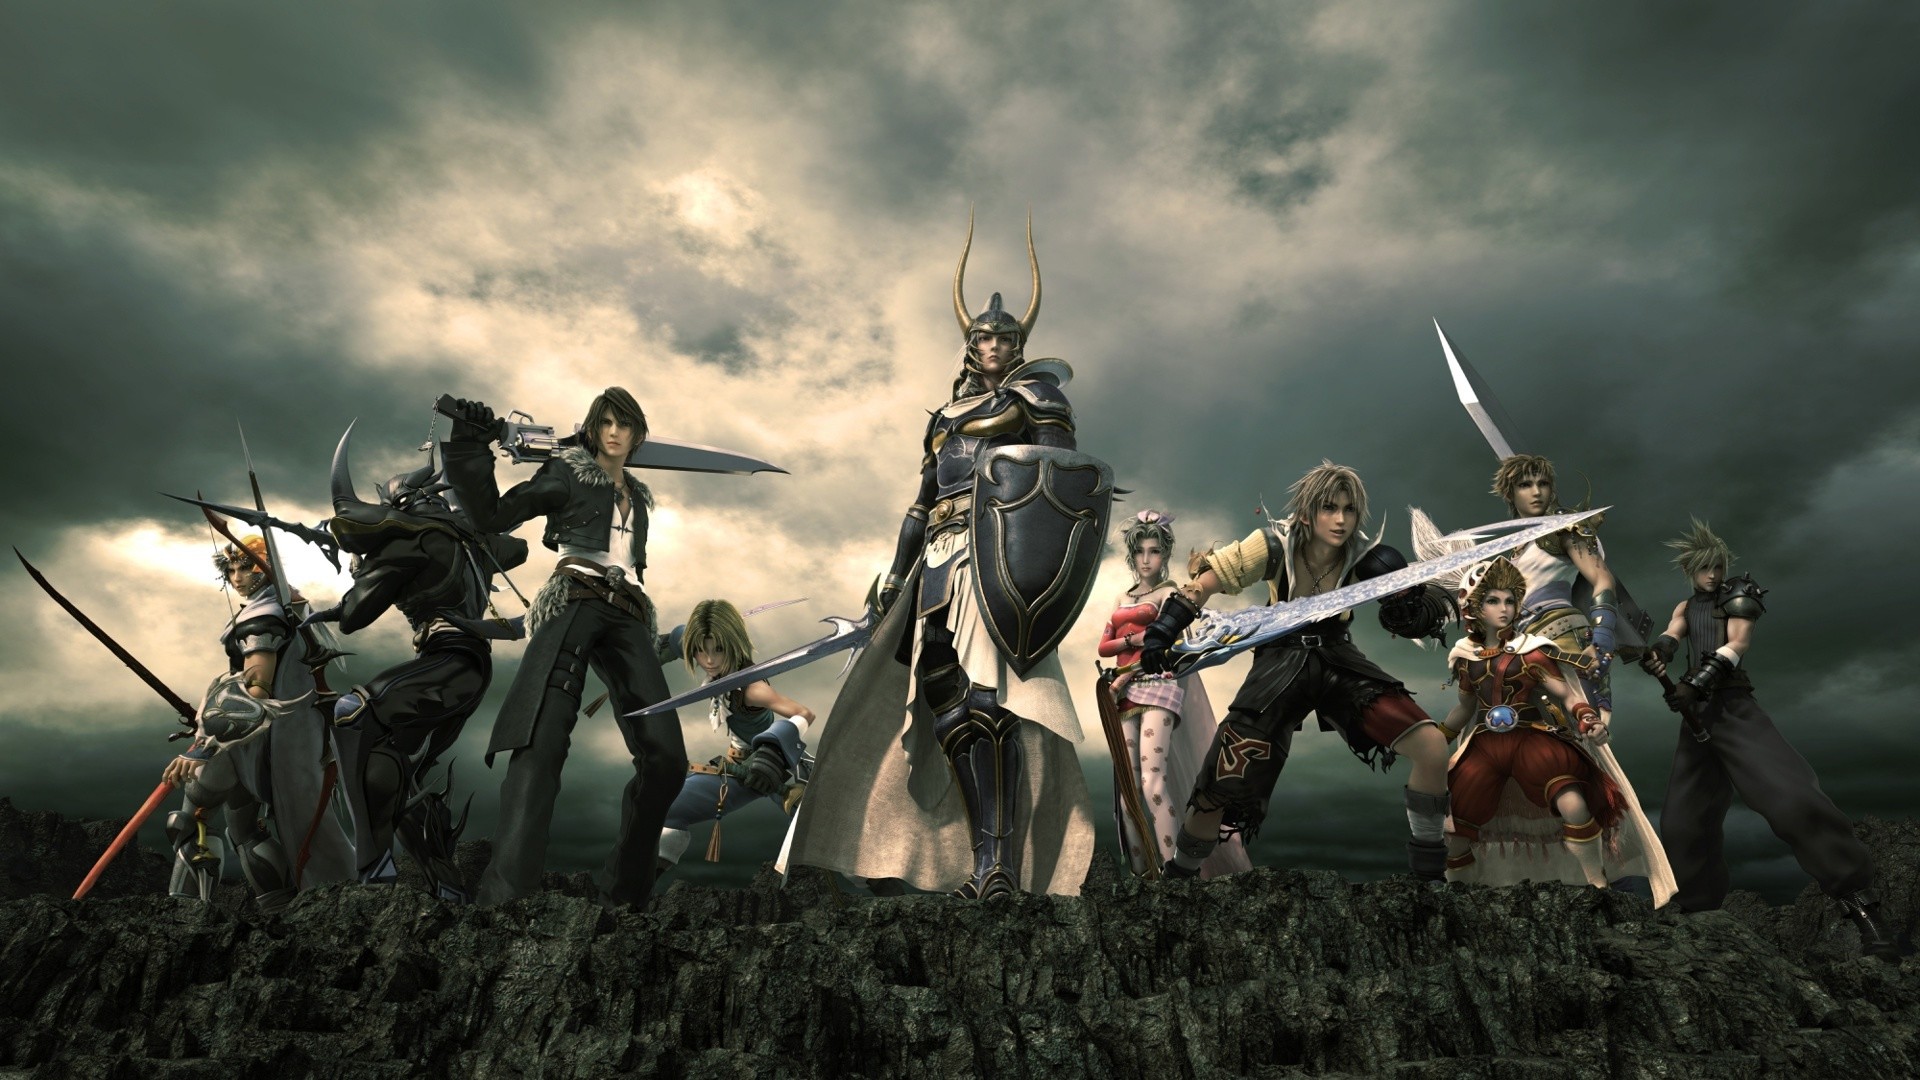 1920x1080 Heroes are preparing for battle Final Fantasy xv